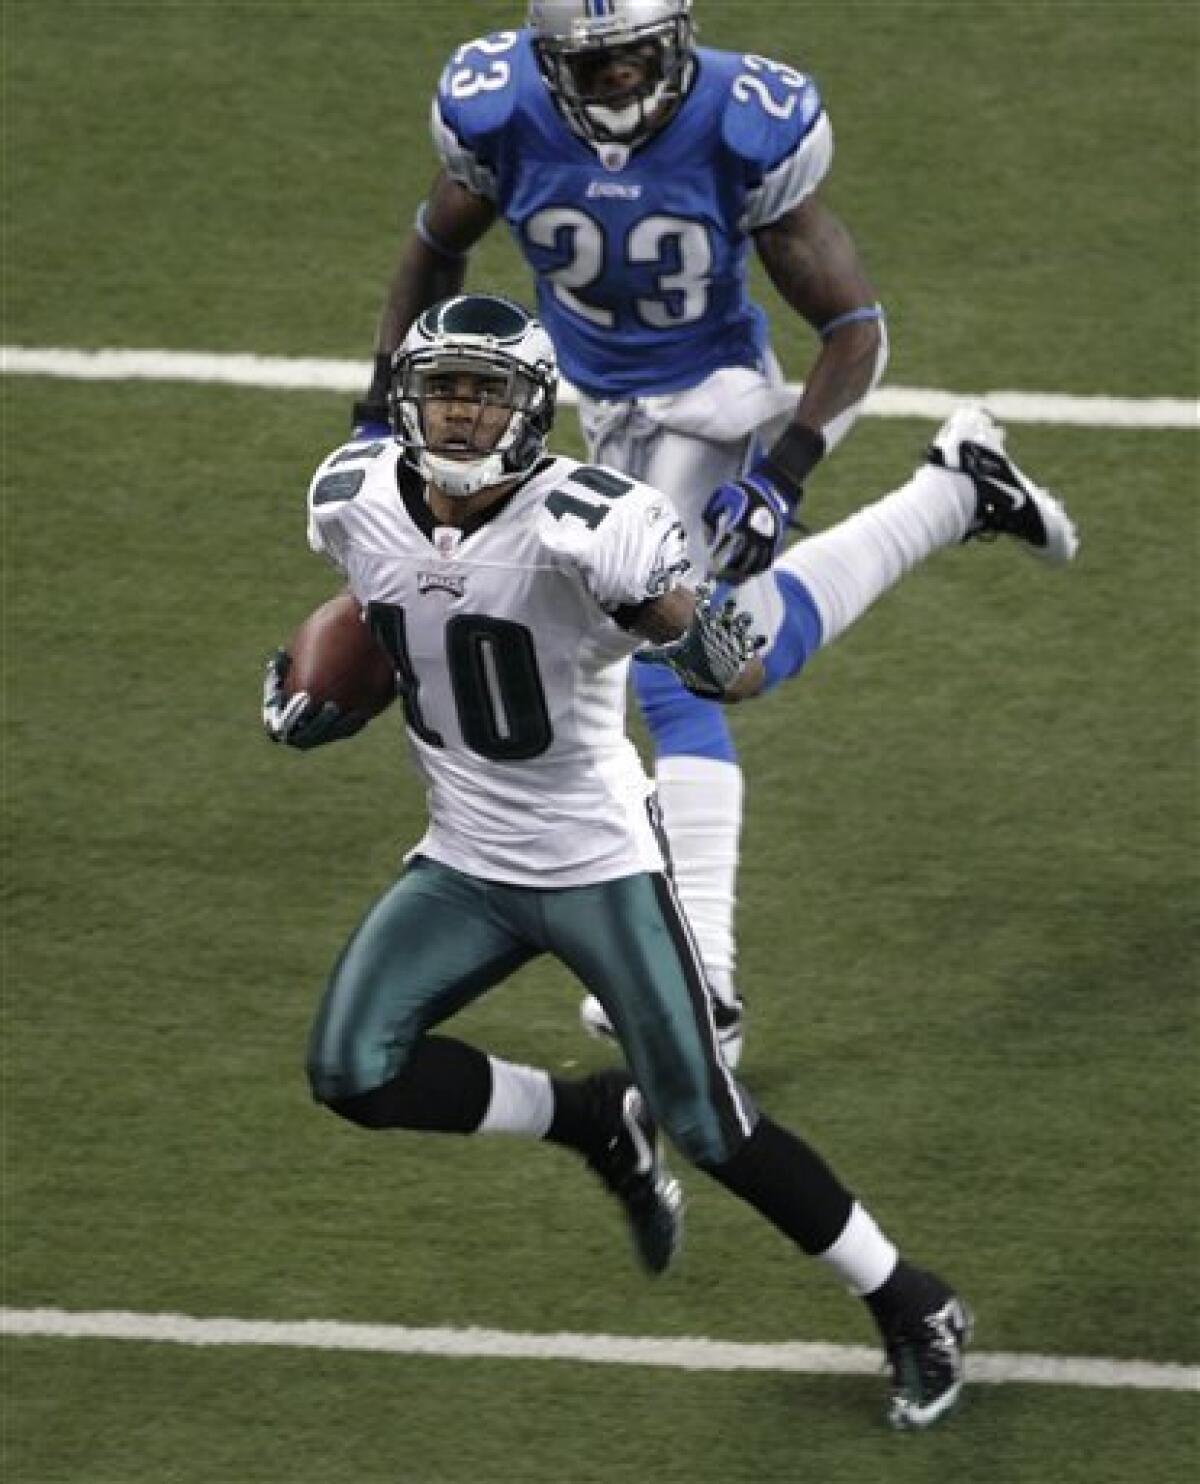 Philadelphia Eagles wide receiver DeSean Jackson scores a touchdown on a 45-yard reception from Michael Vick against the Detroit Lions in the first quarter of an NFL football gamein Detroit, Sunday, Sept. 19, 2010. (AP Photo/Paul Sancya)